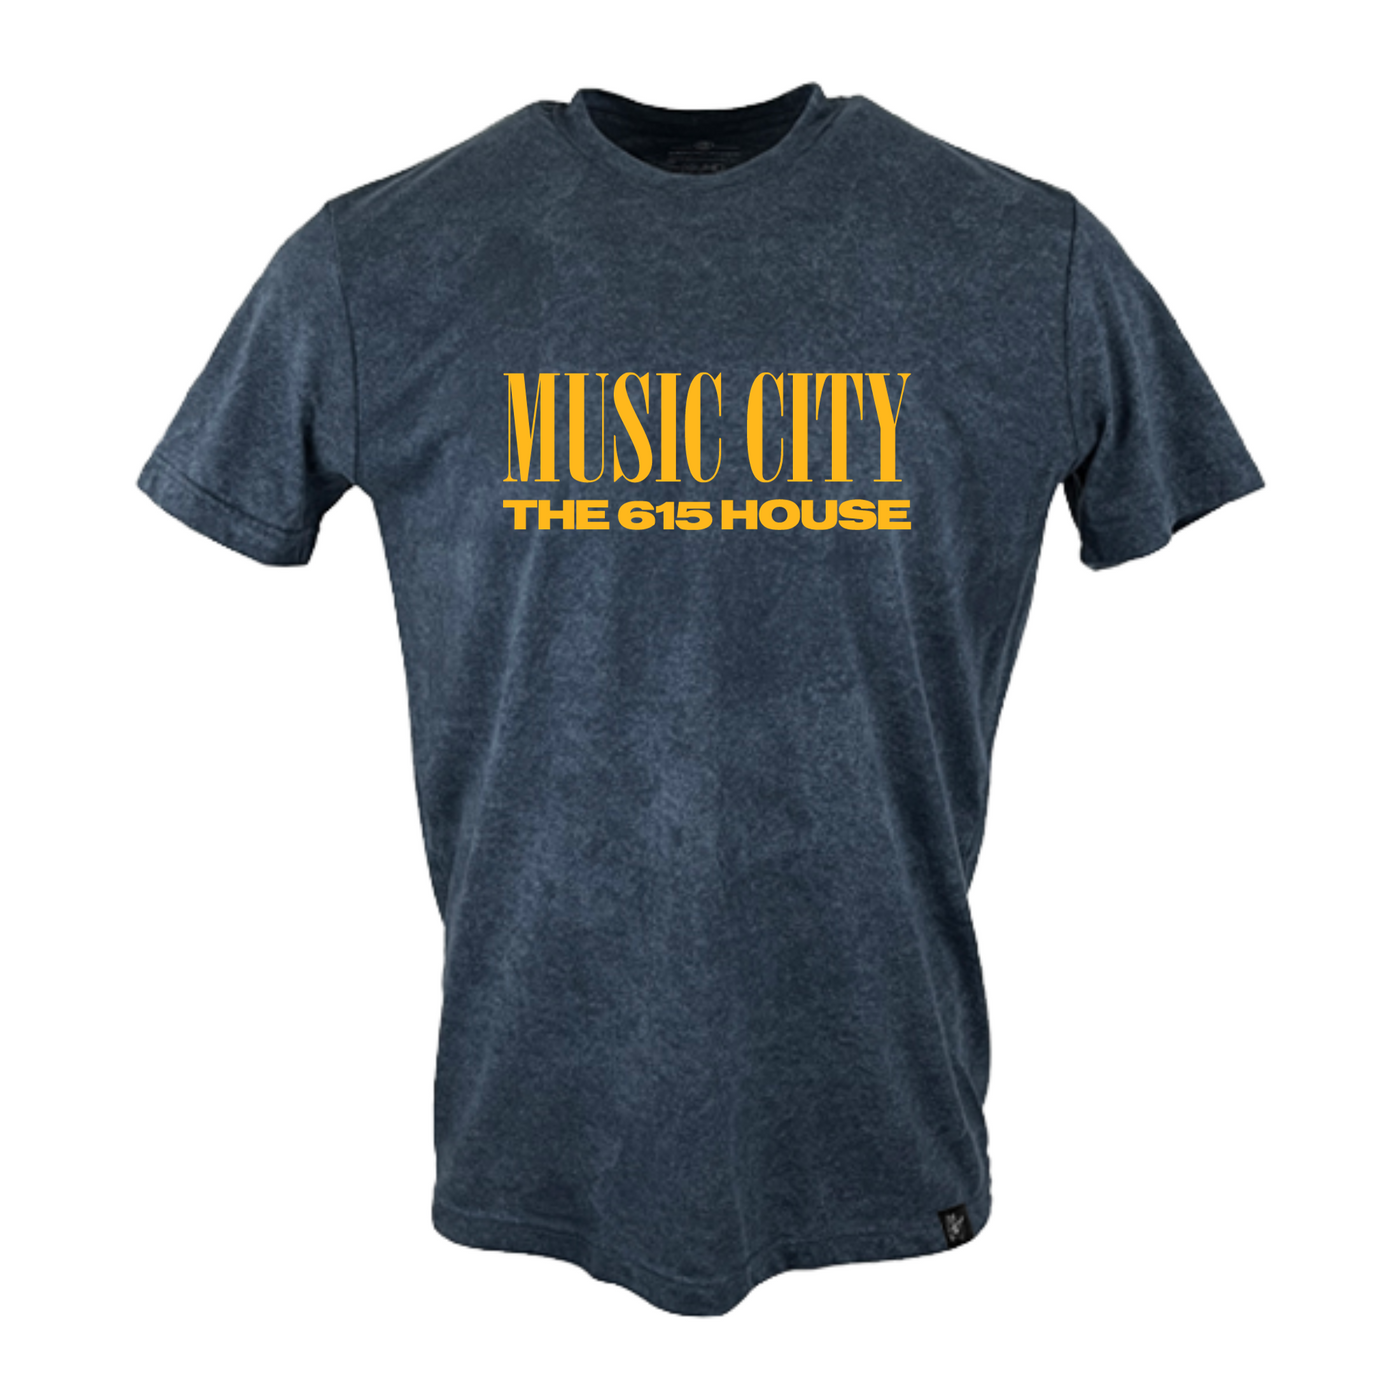 THE 615 HOUSE - Music City T-Shirt: Vintage Navy